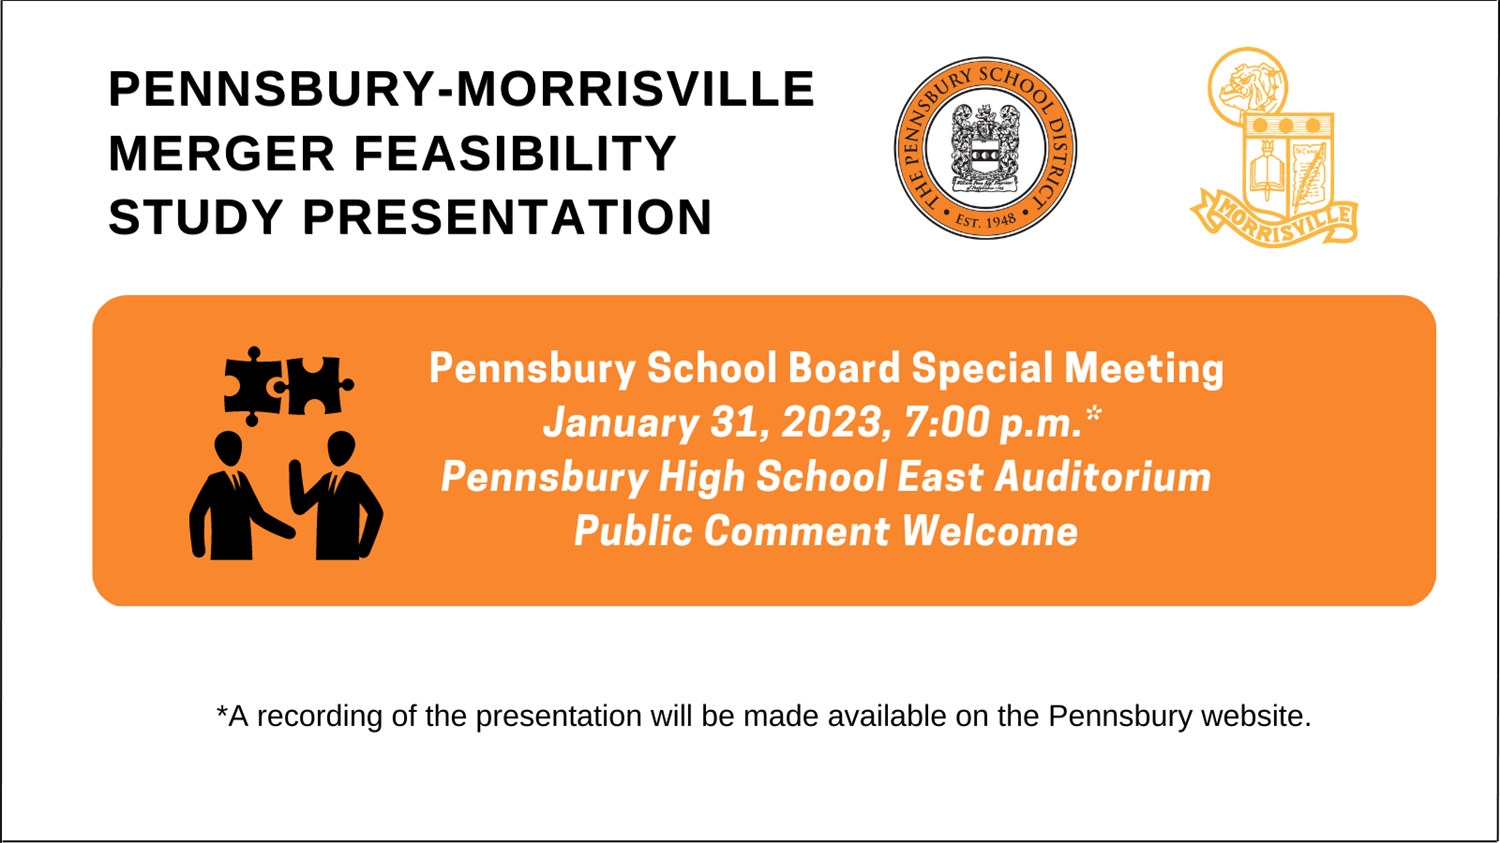 Pennsbury-Morrisville Feasibility Study Presentation, January 31, 2023 at 7:00 p.m. PHS East